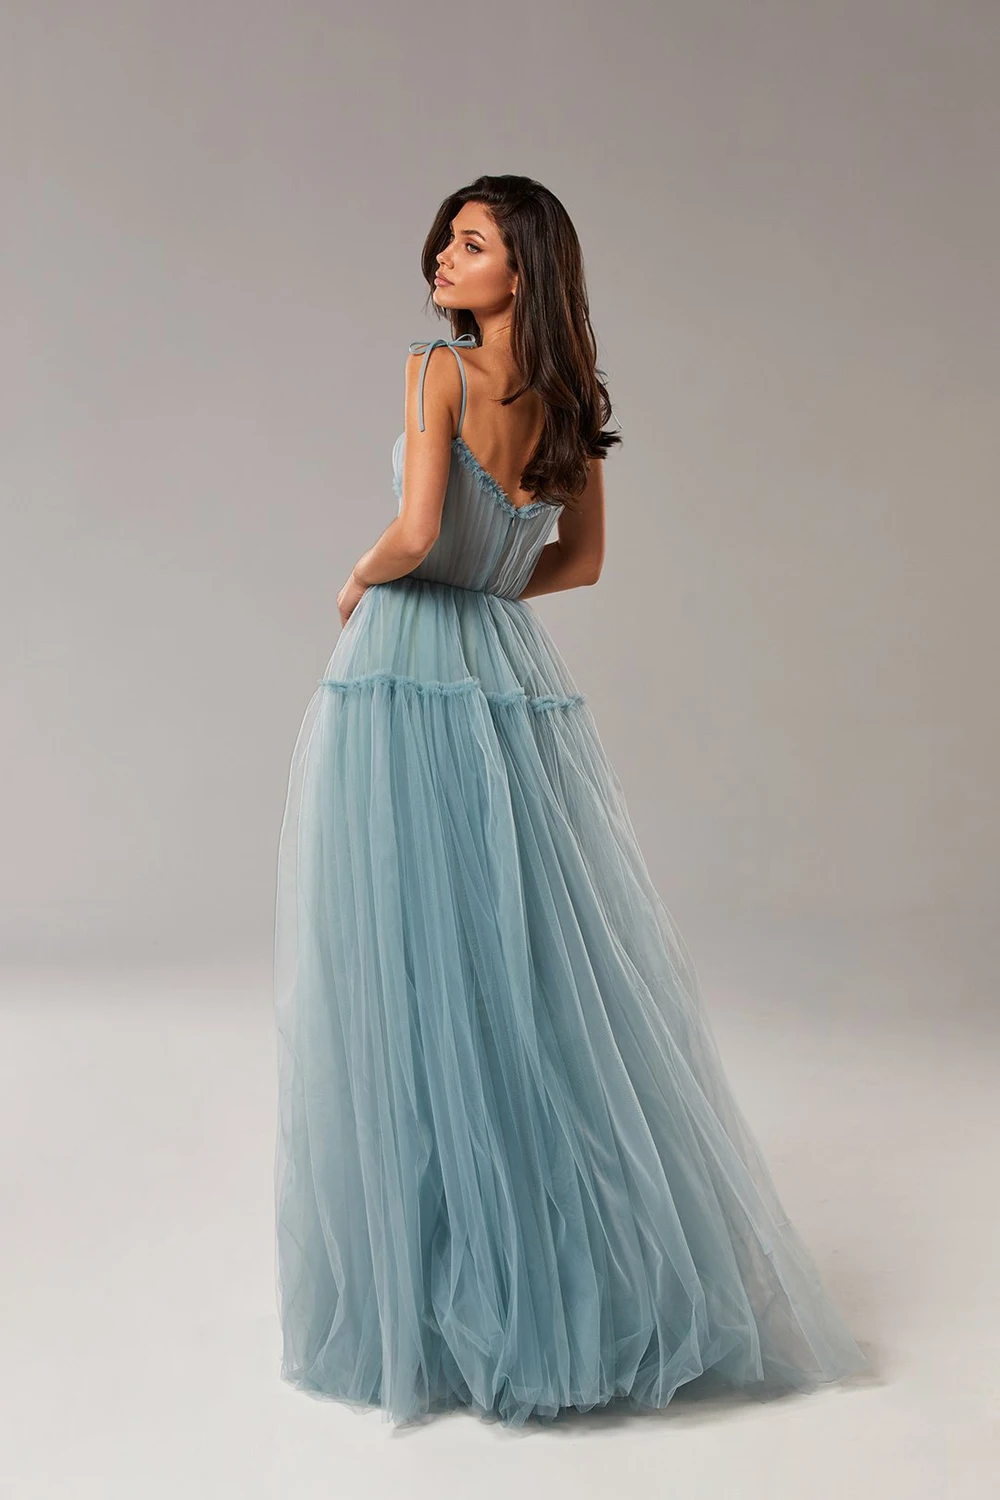 Sevintage Blush Pink/Blue Long Prom Dresses 2021 Spaghetti Straps Tiered Skirt A-Line Party Dresses Pleated Tulle Formal Gowns